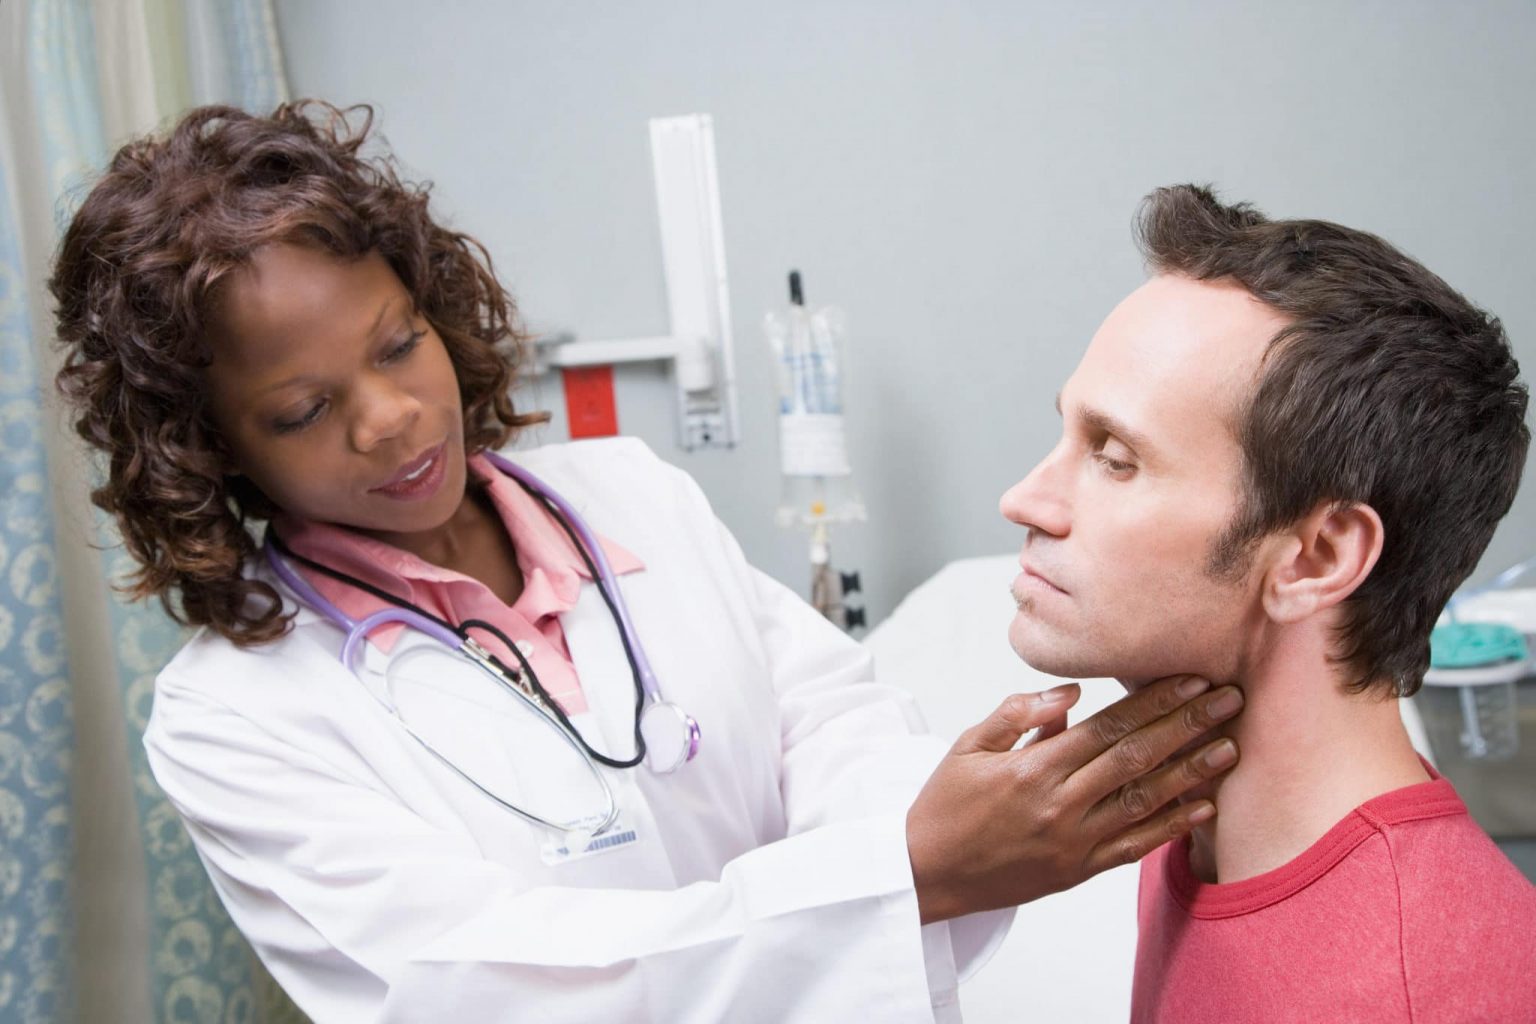 Female doctor examines the outside of a male patient's throat.